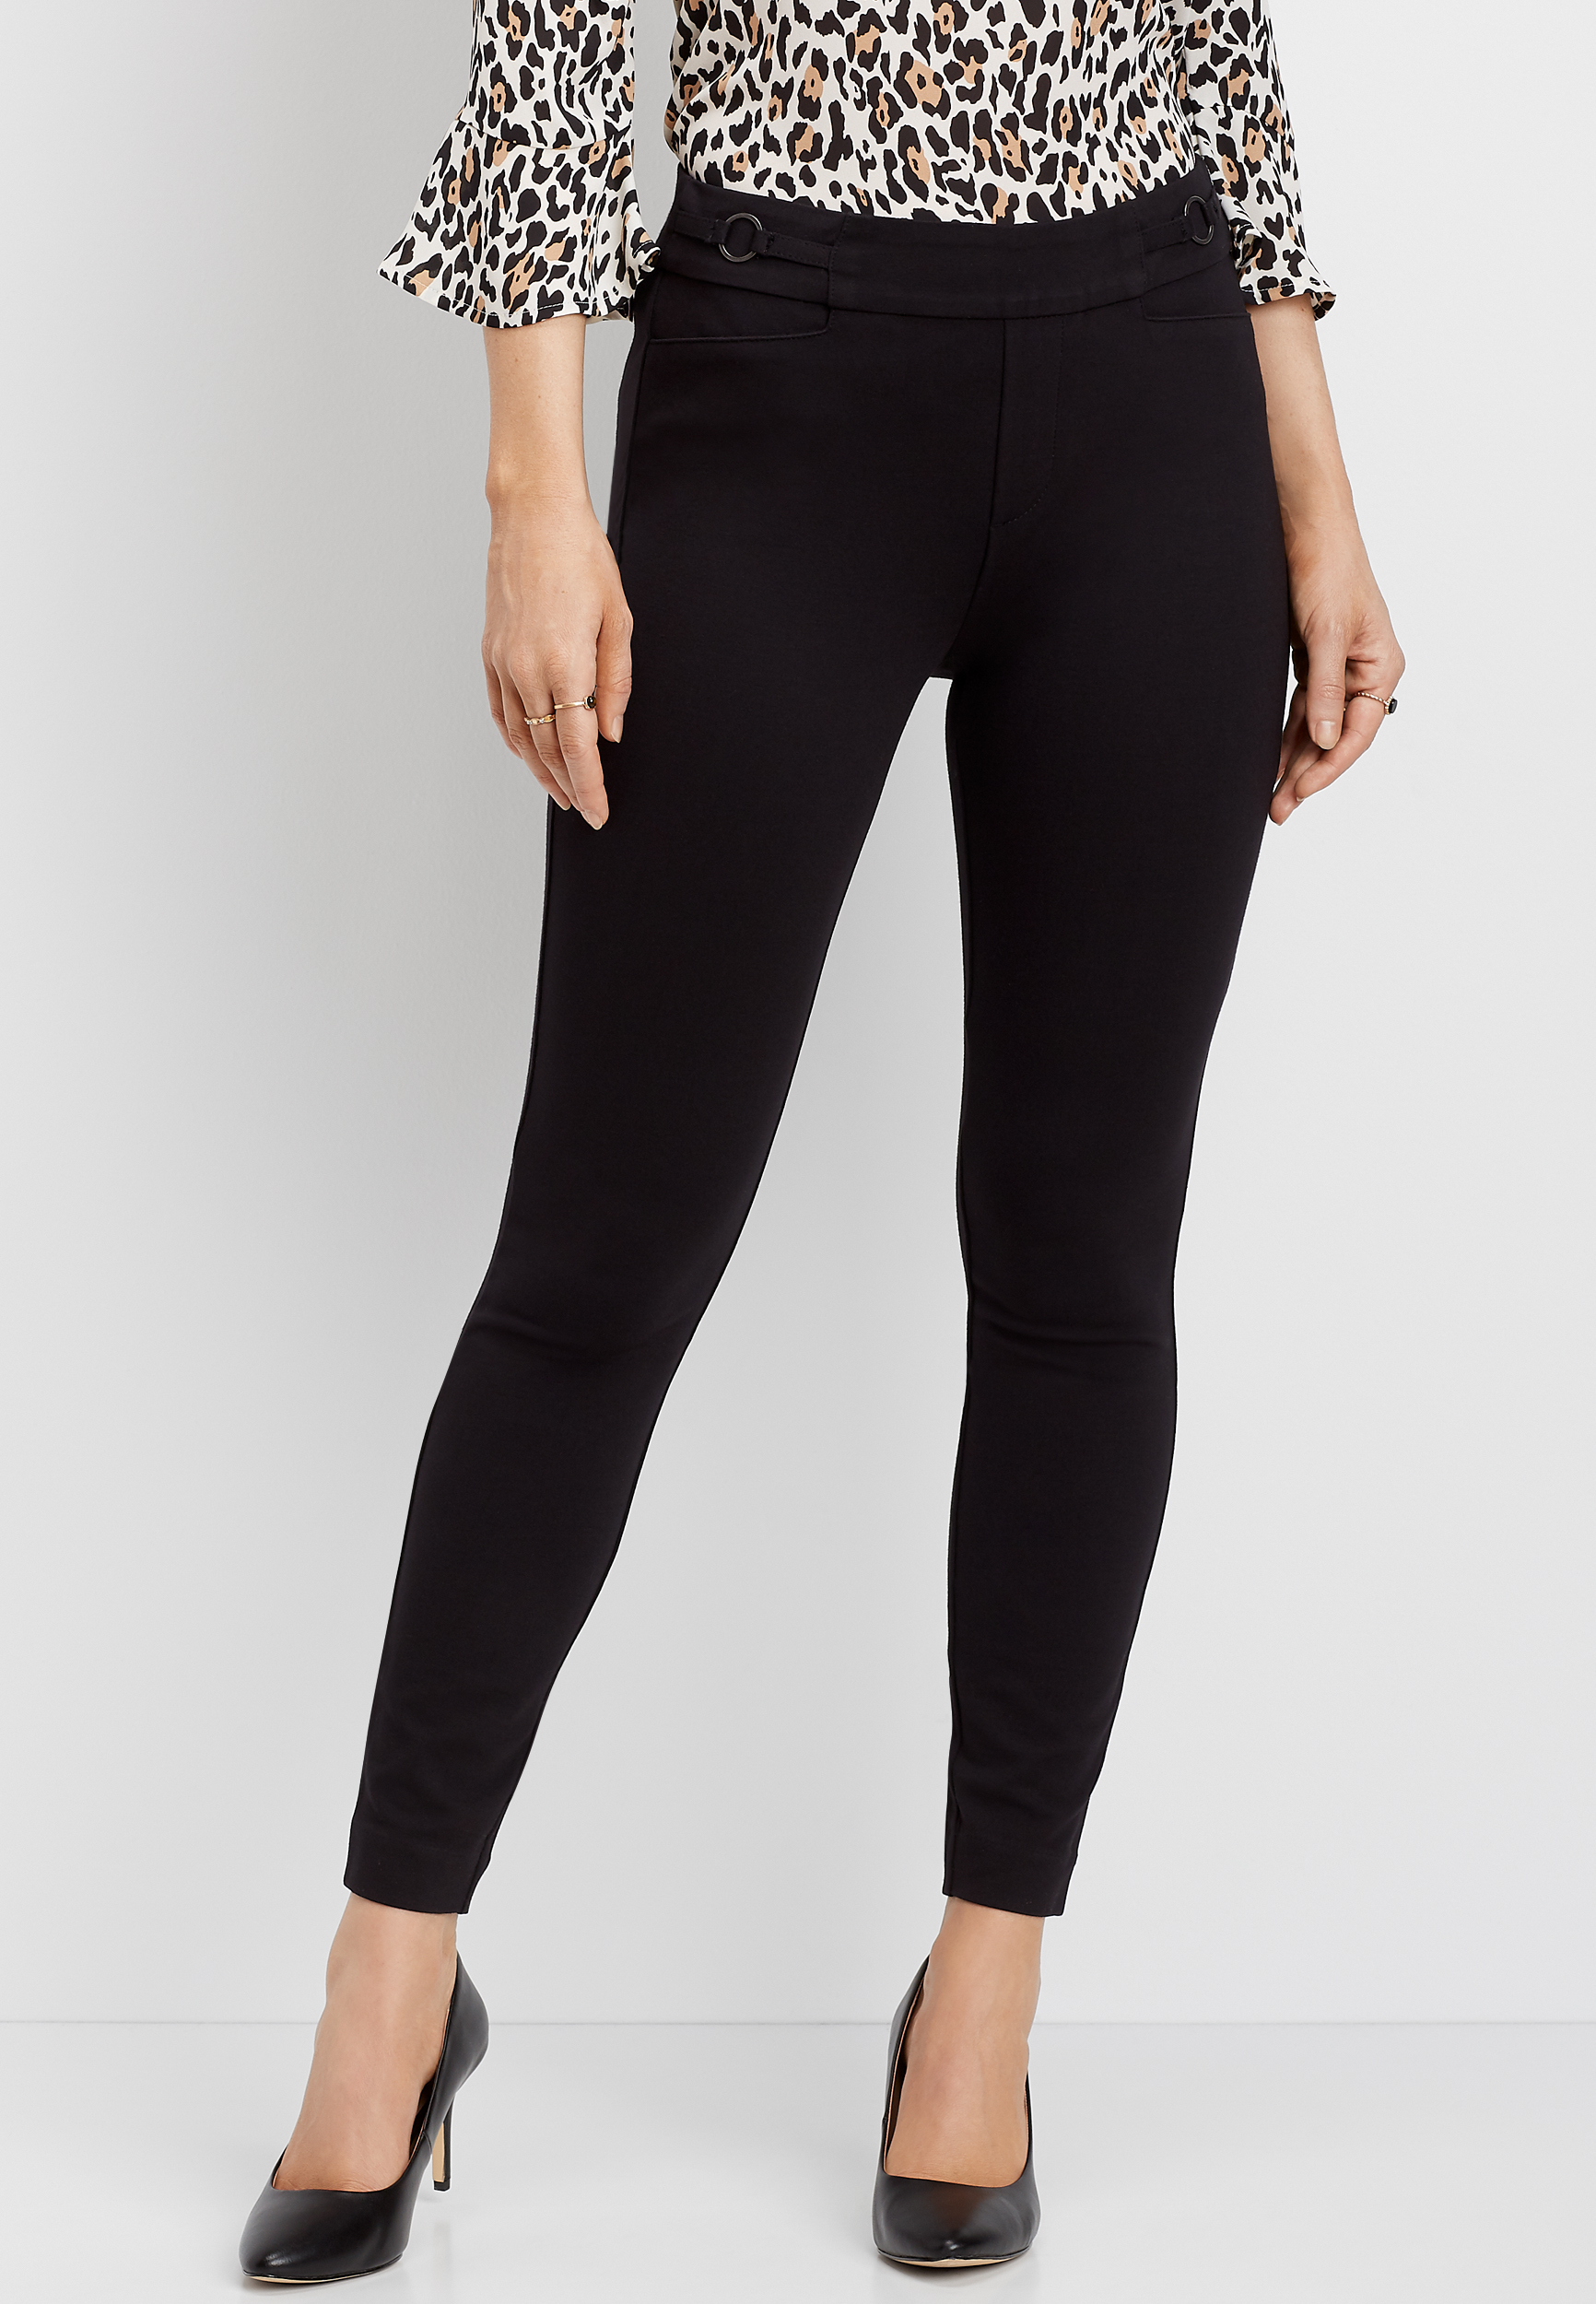 high rise pull on ponte skinny ankle pant | maurices